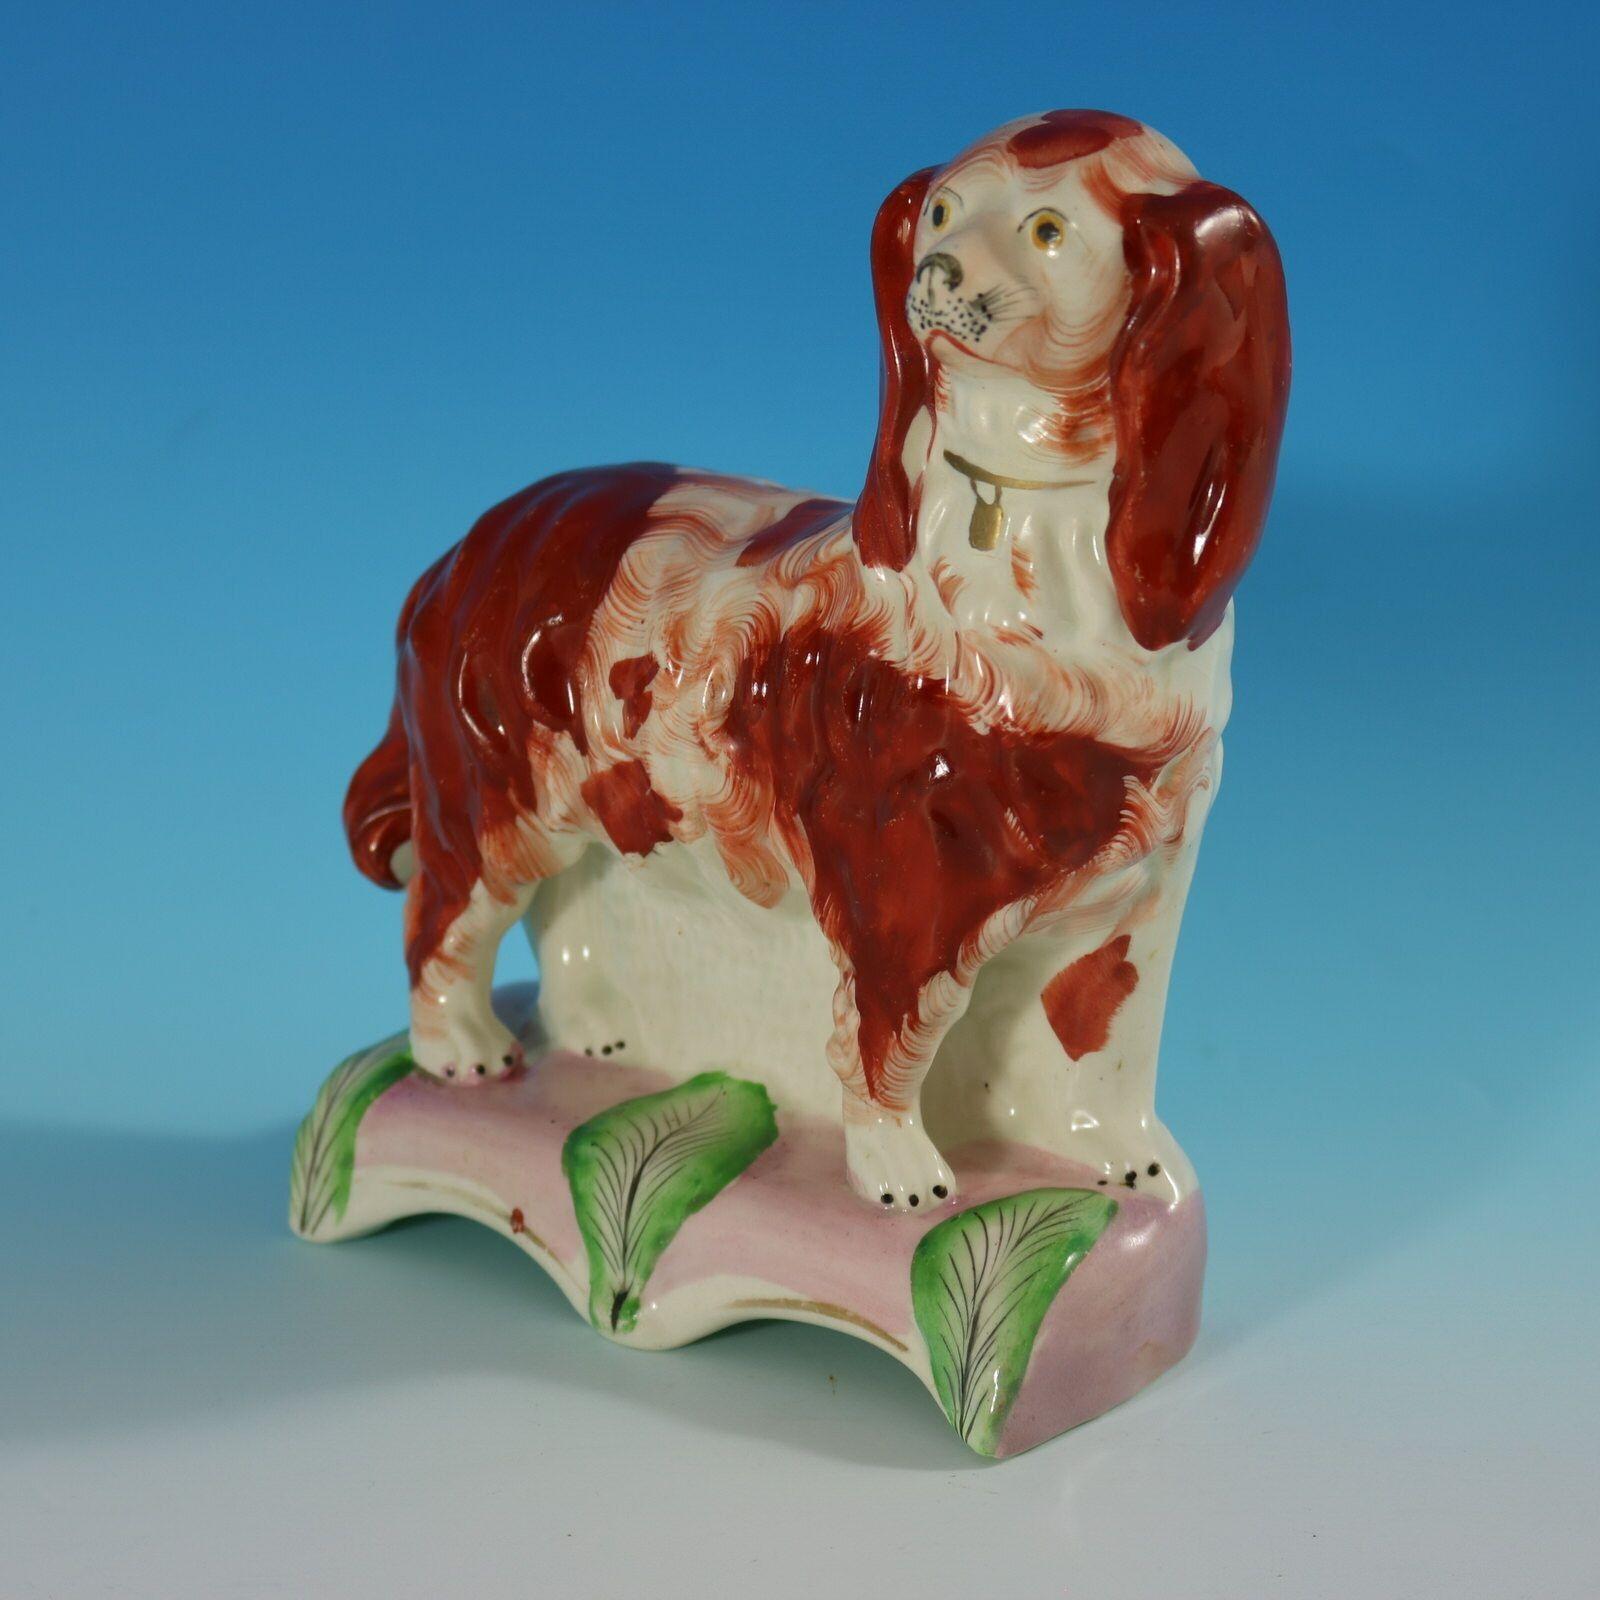 Staffordshire Pottery figure which features a King Charles spaniel, stood on a leaf embellished base. Dull gilt embellishment.